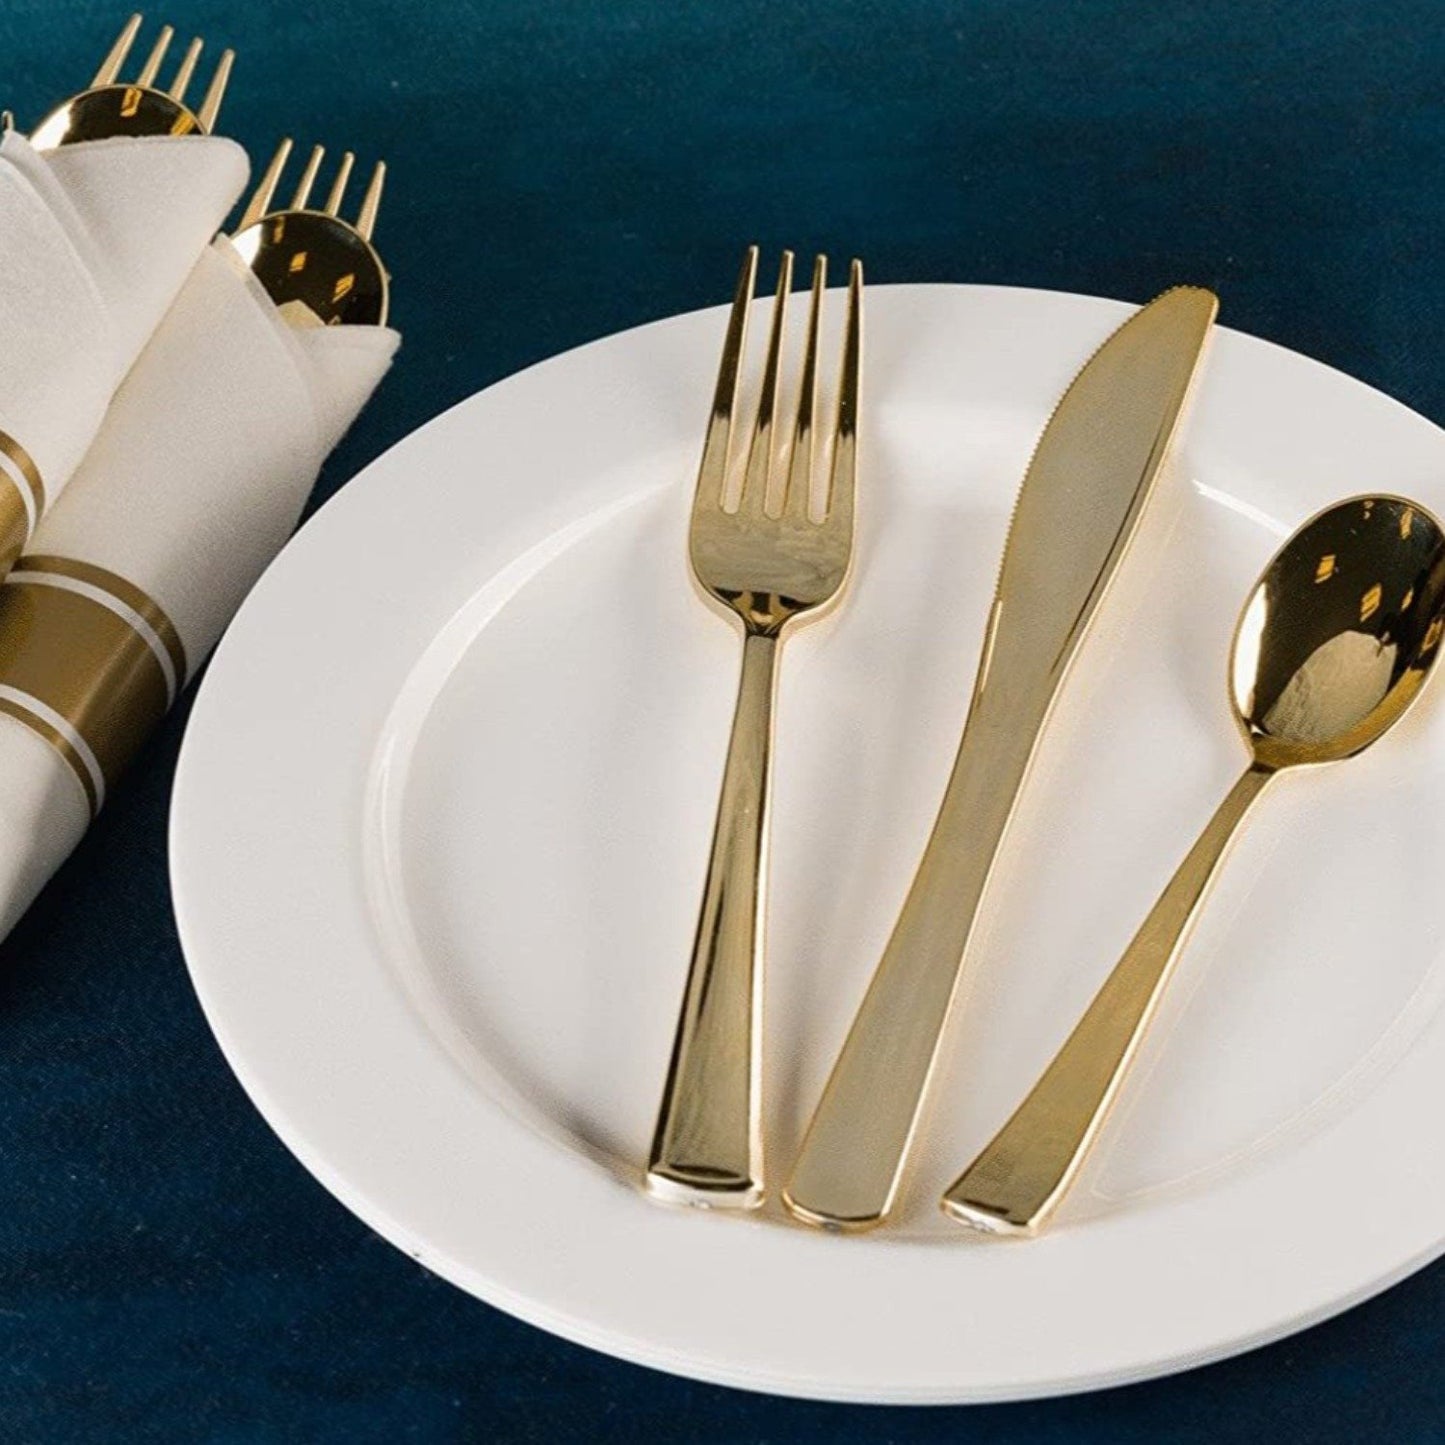 Pre-Rolled Cutlery And Napkin Set Gold Tablesettings Lillian   